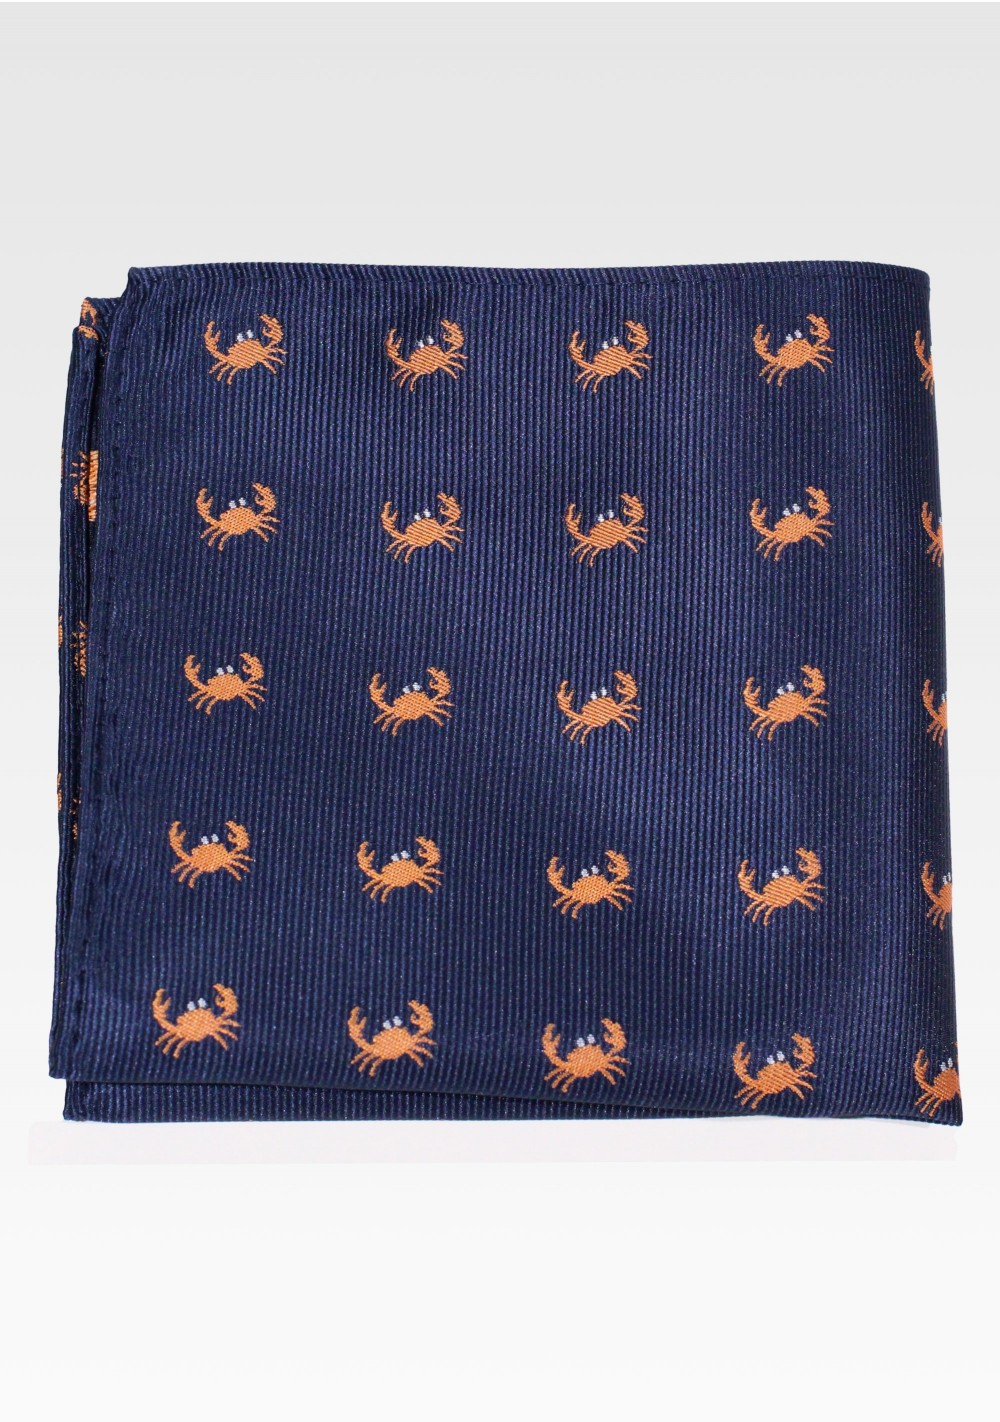 Navy Pocket Square with Crabs